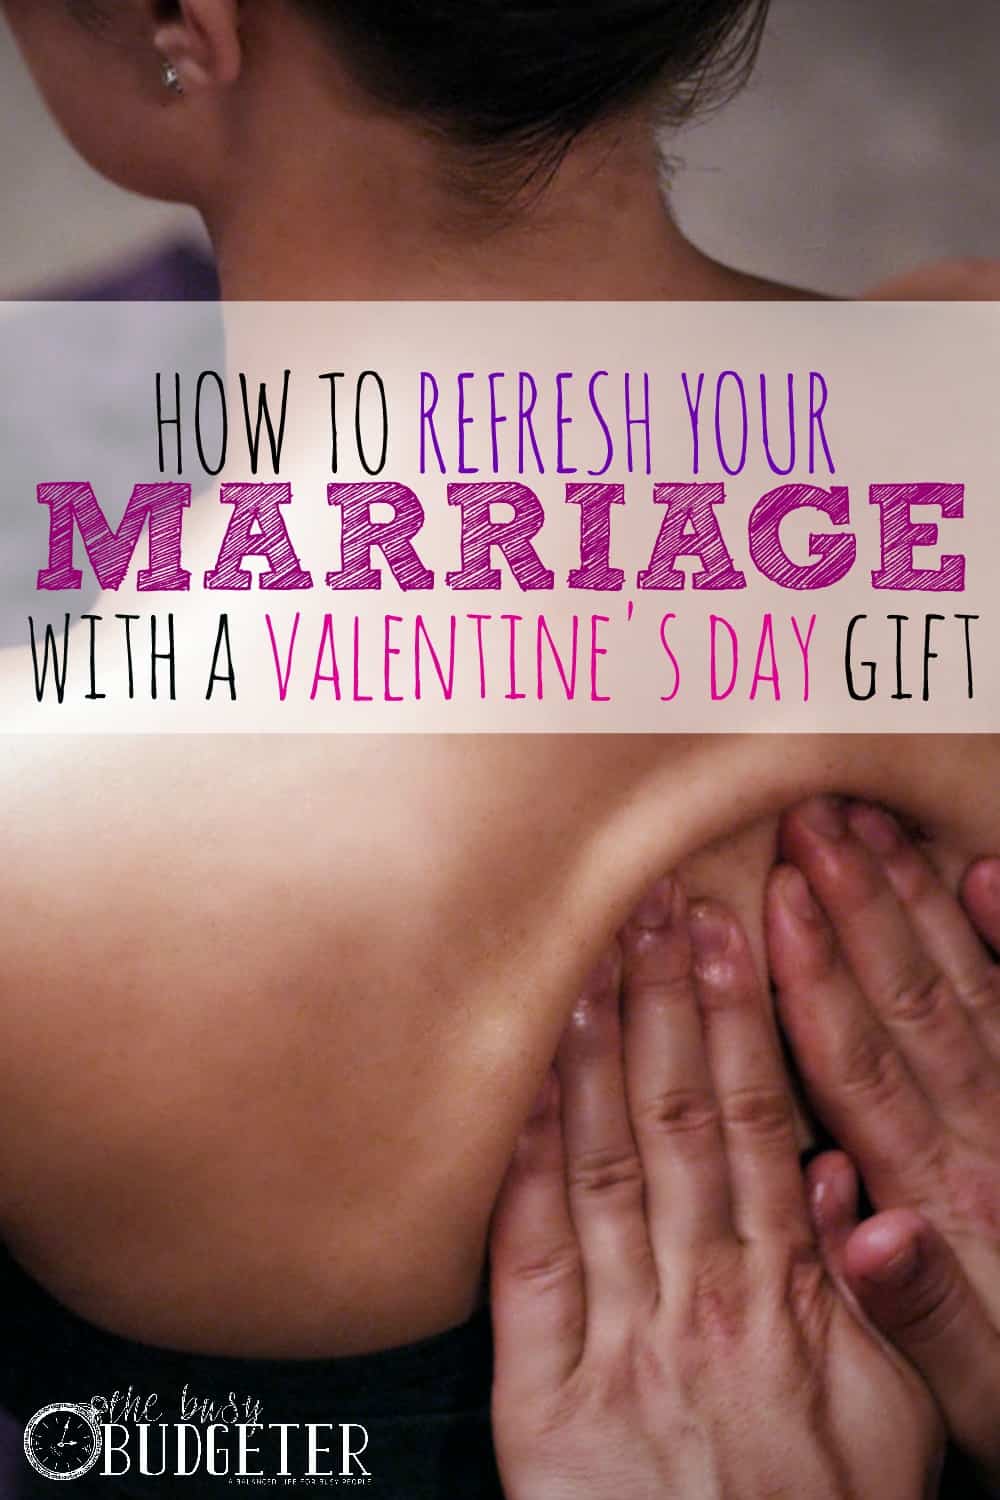 Refresh Your Marriage with a Valentine's Gift - Definitely doing this - it's totally what our marriage needs! Plus, free massages at home for the rest of our lives!? Who doesn't love that?!